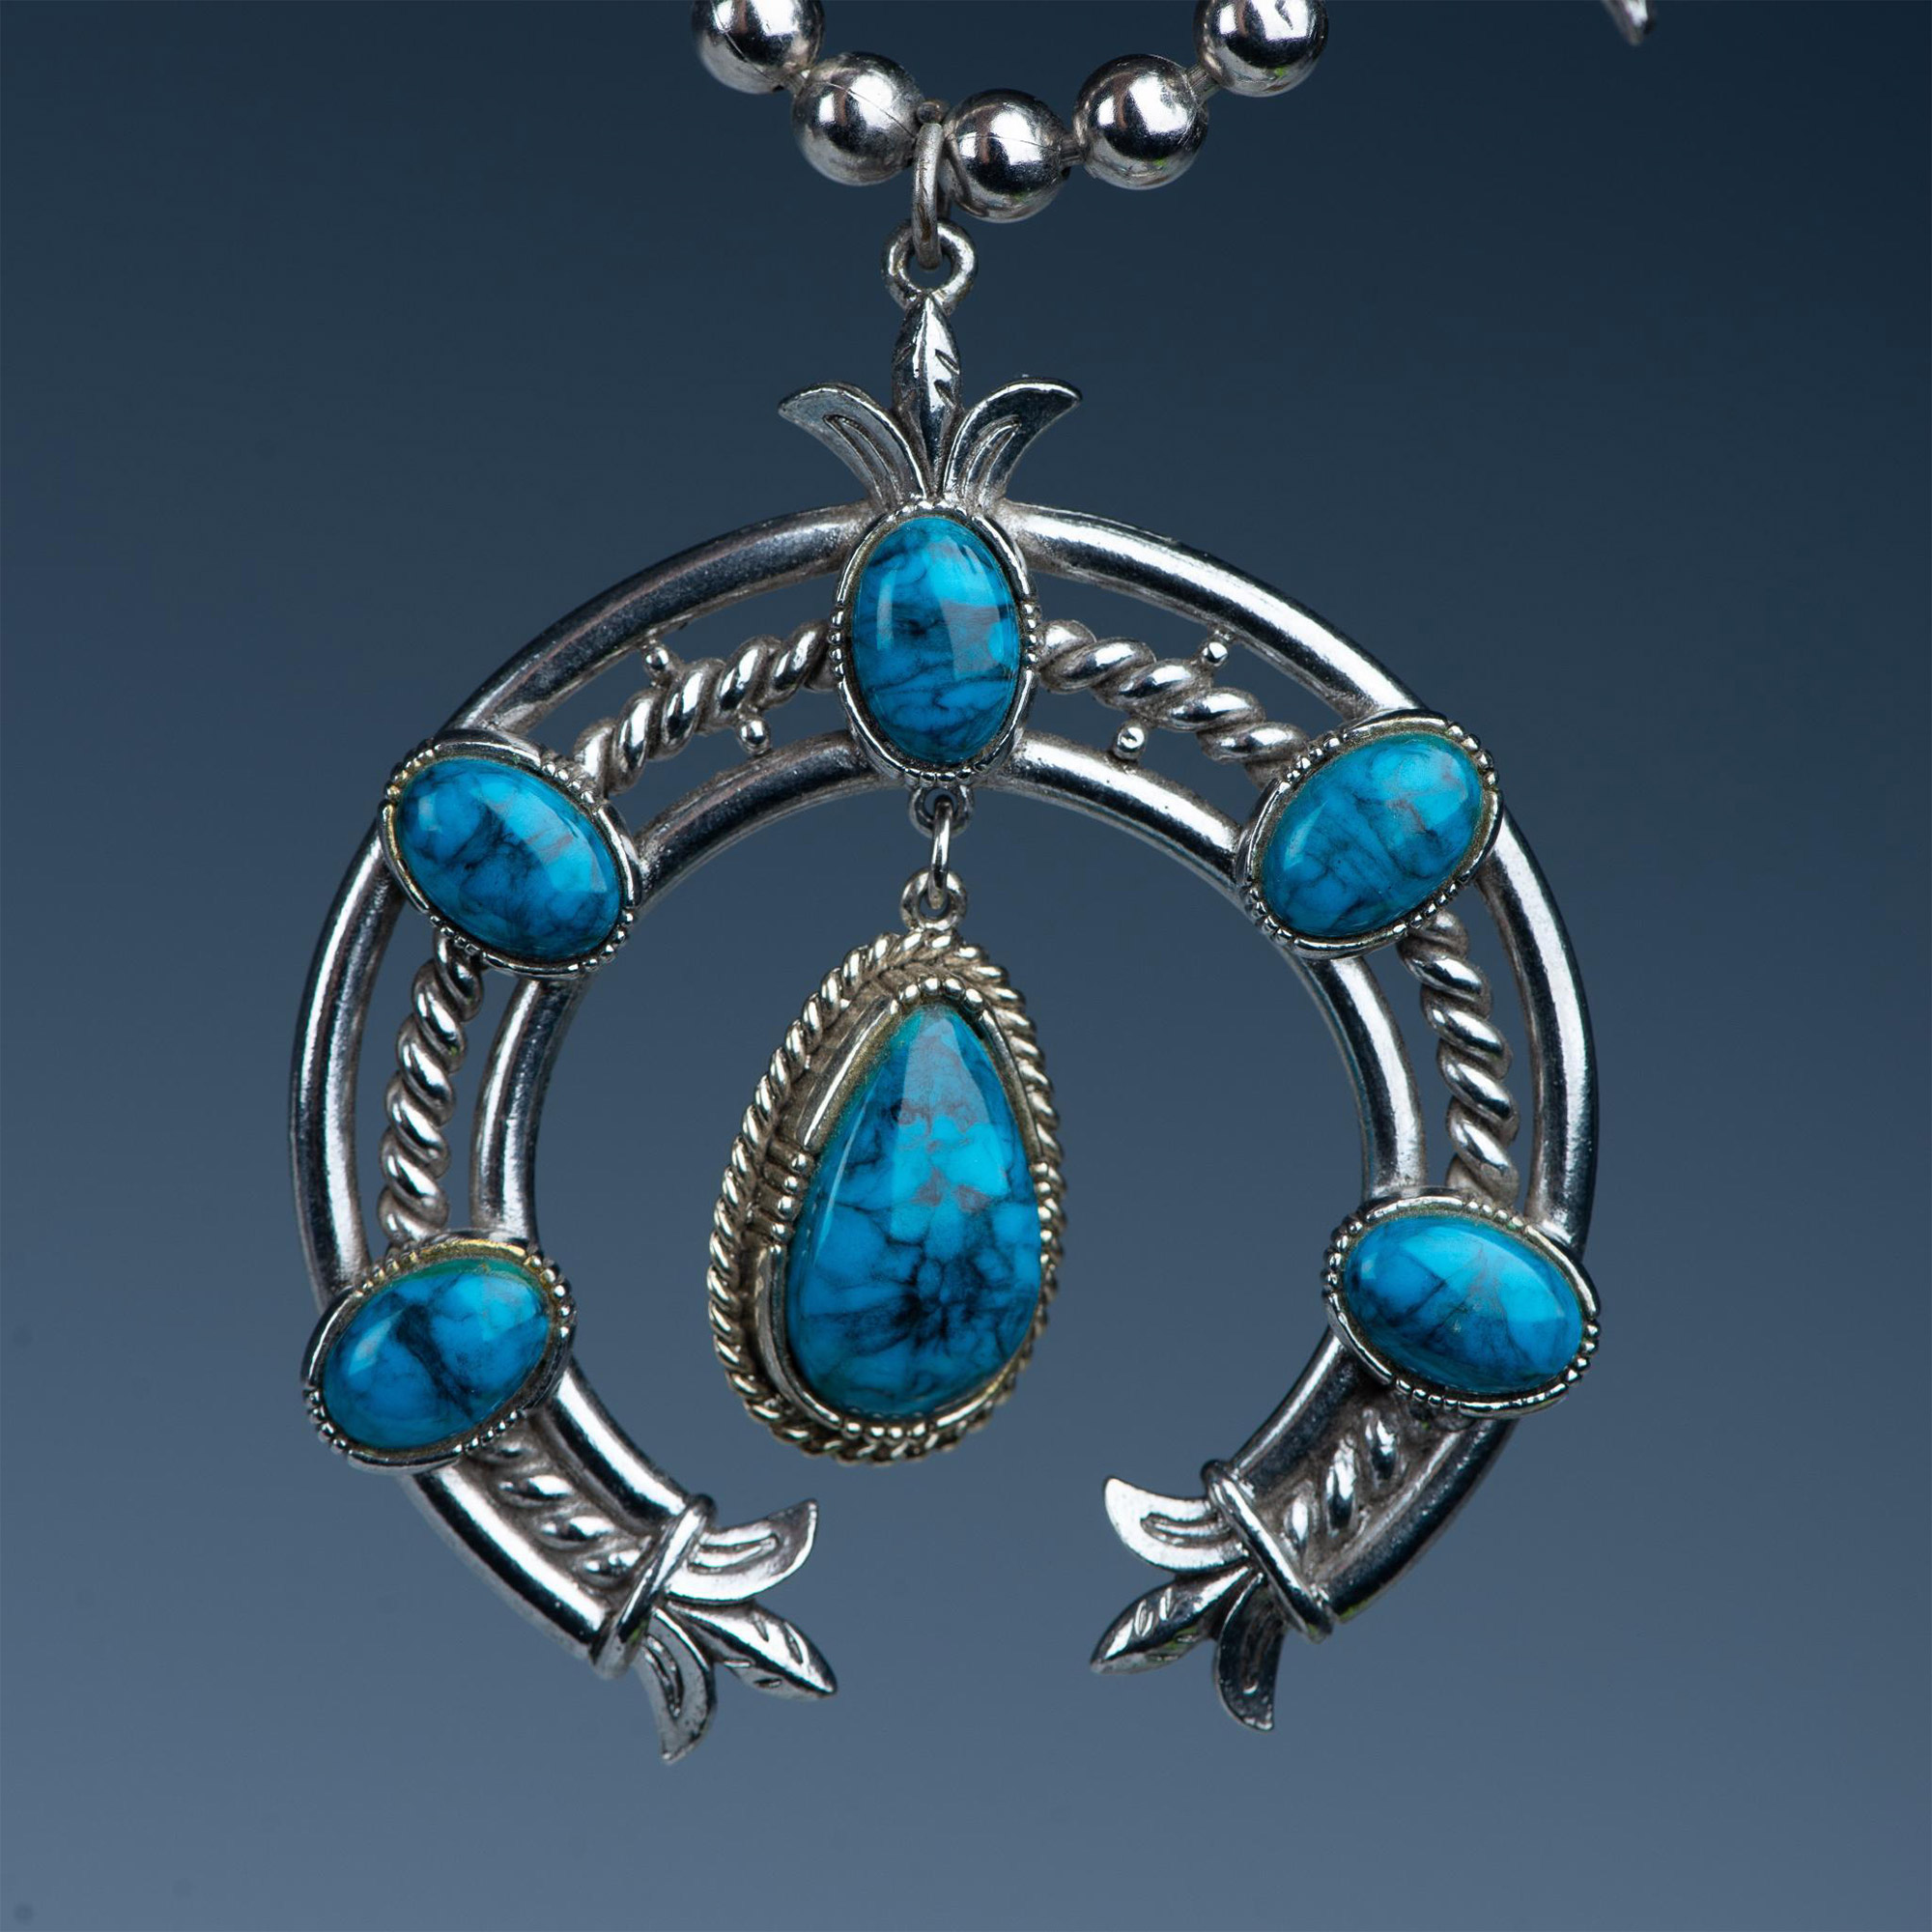 Native American Style Faux Turquoise Squash Blossom Necklace - Image 2 of 3